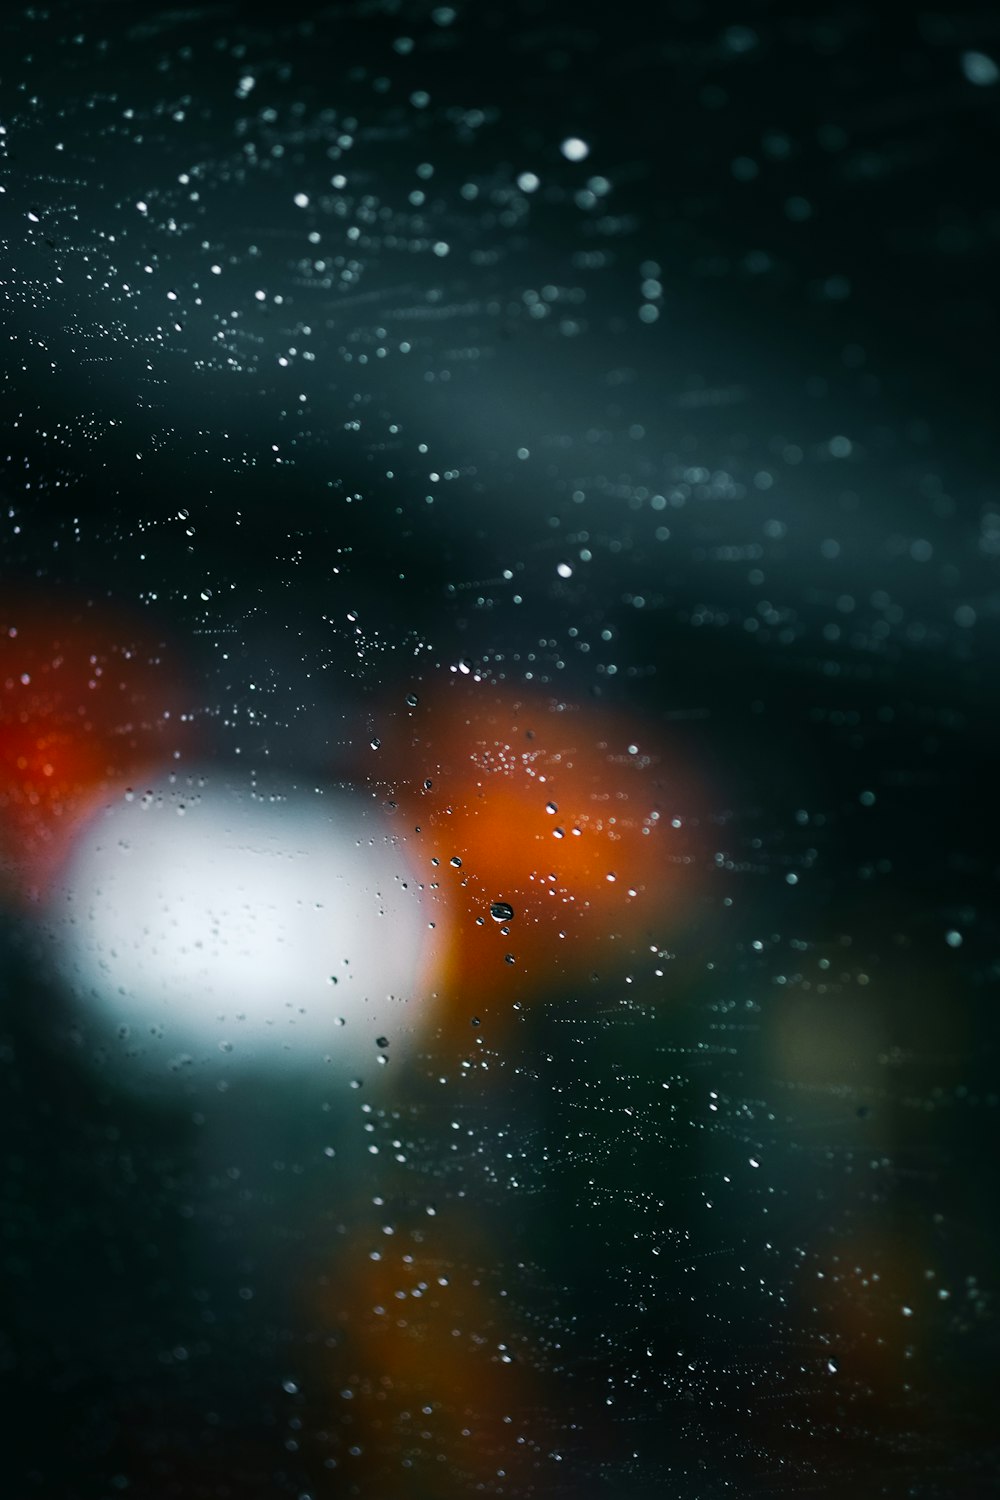 a blurry image of a street light in the rain